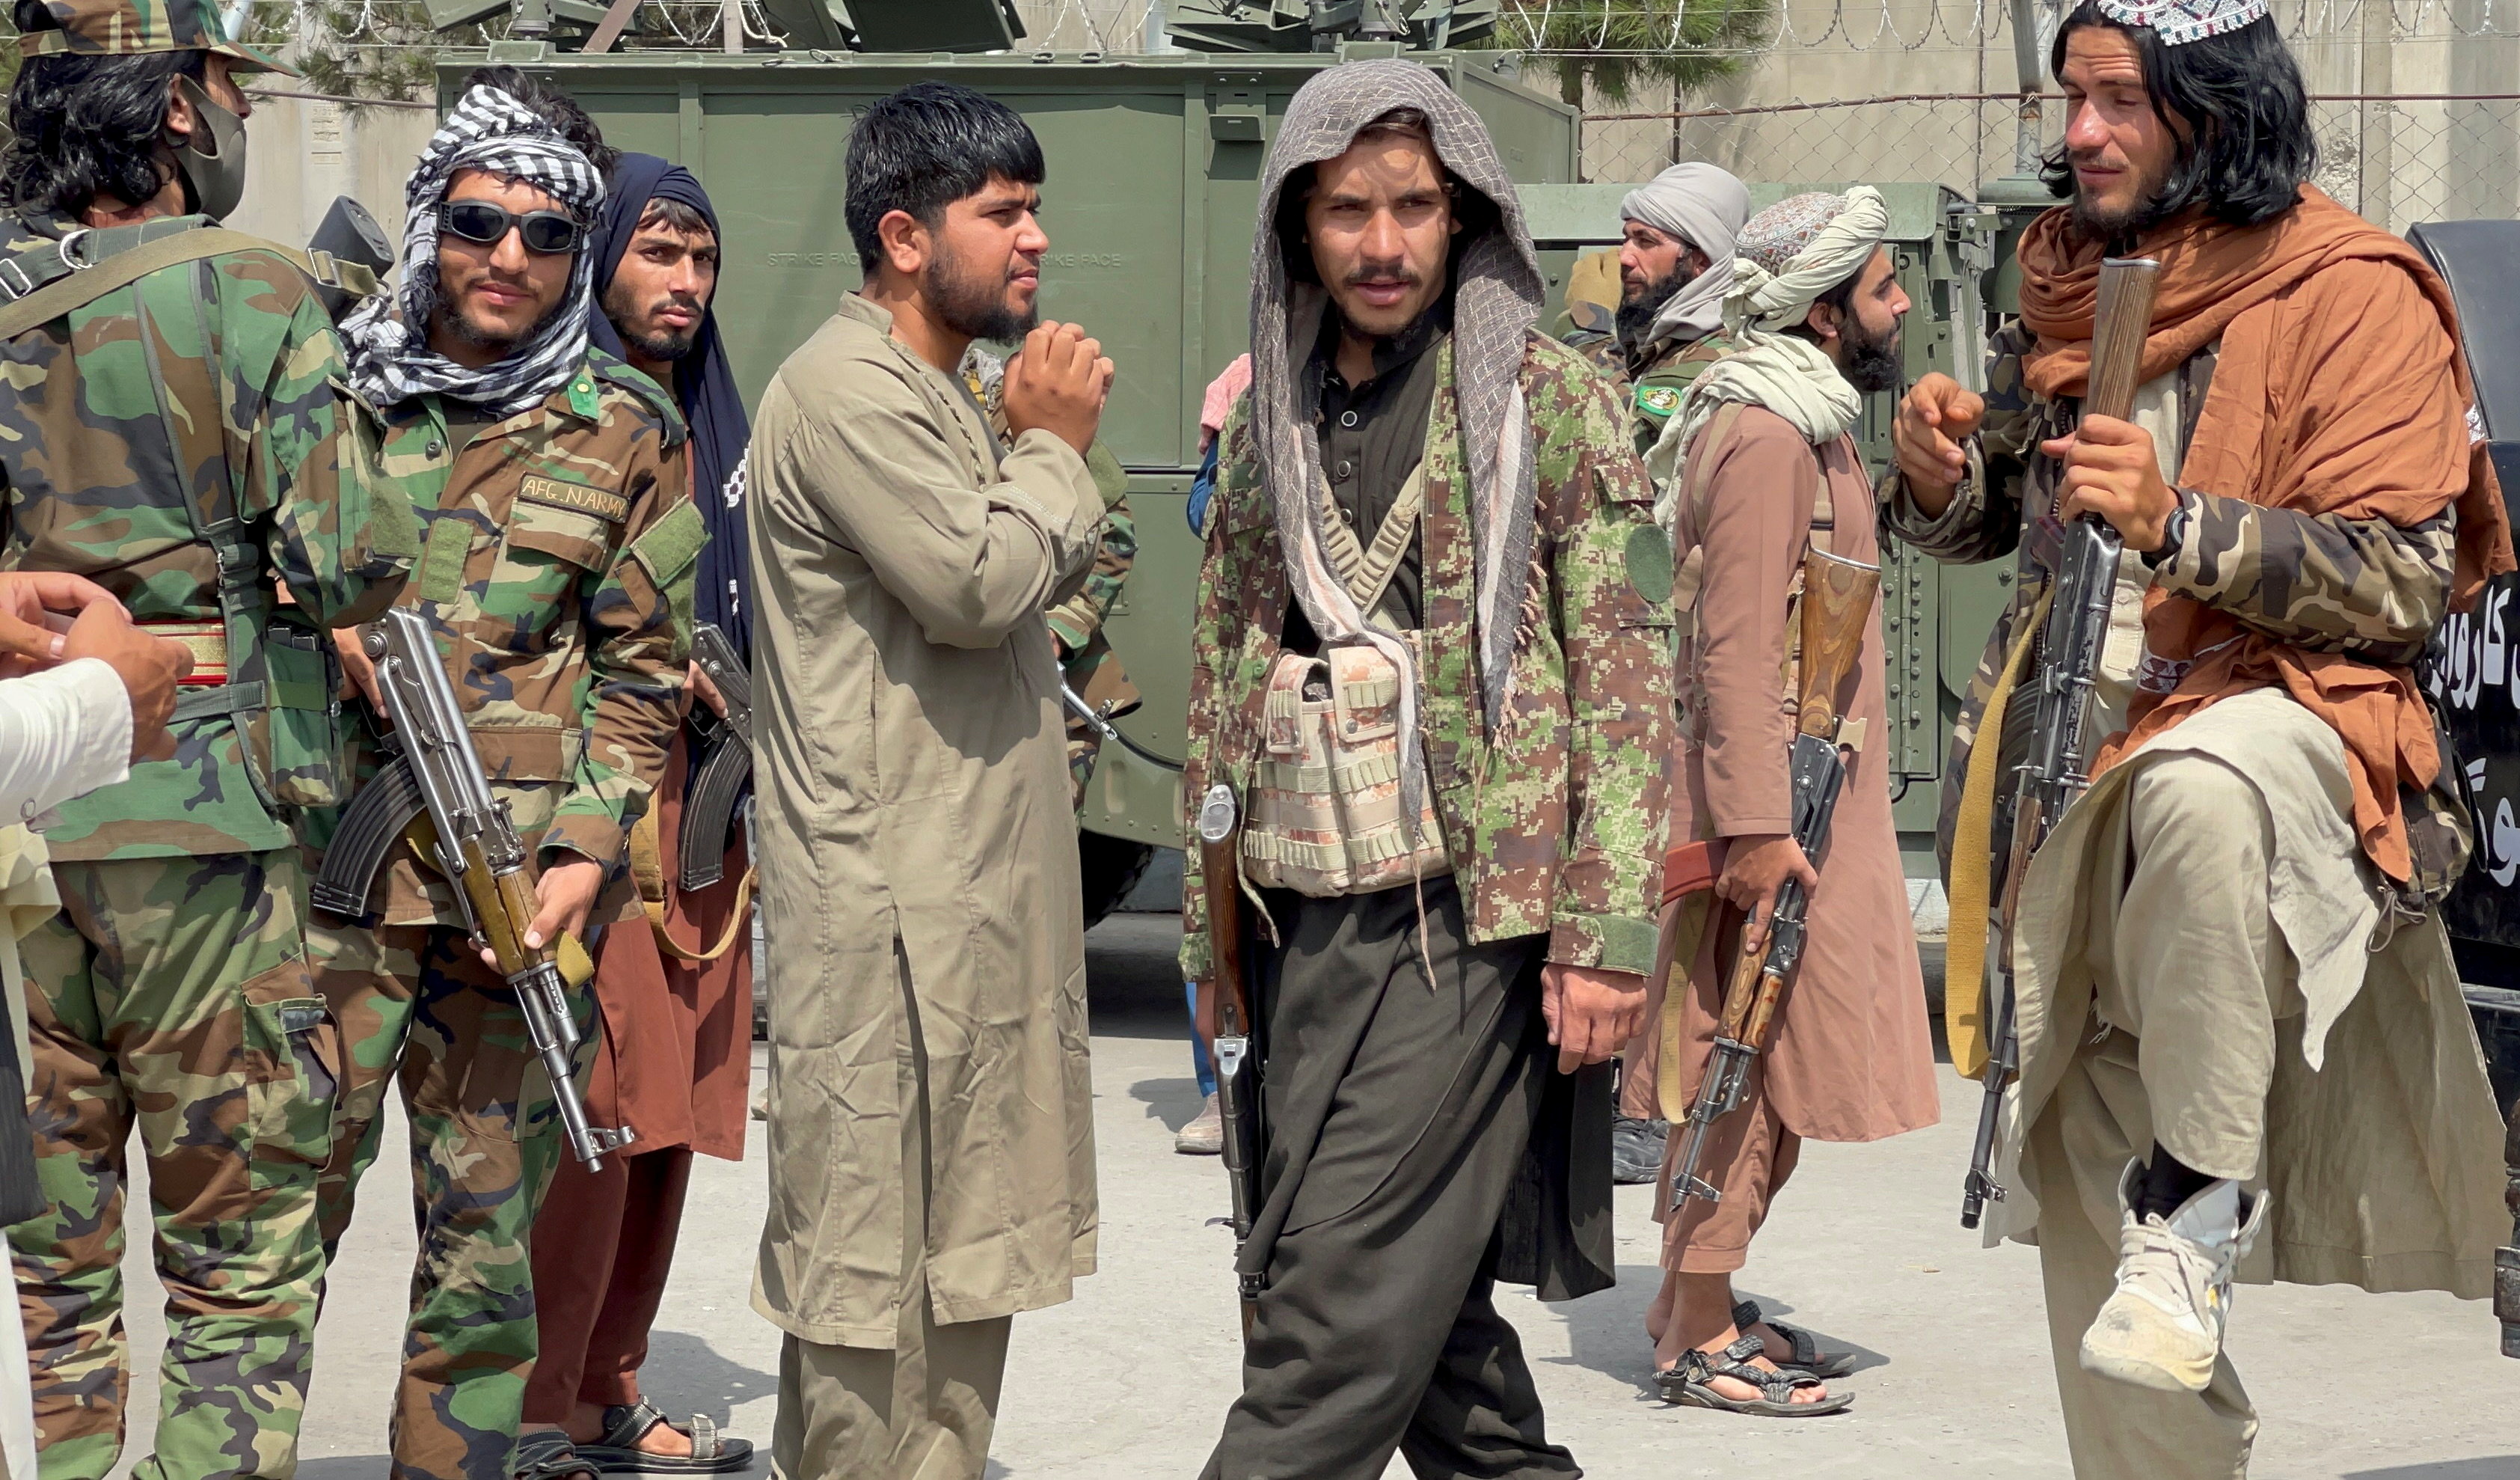 Taliban forces patrol at a runway a day after U.S troops withdrawal from Hamid Karzai International Airport in Kabul